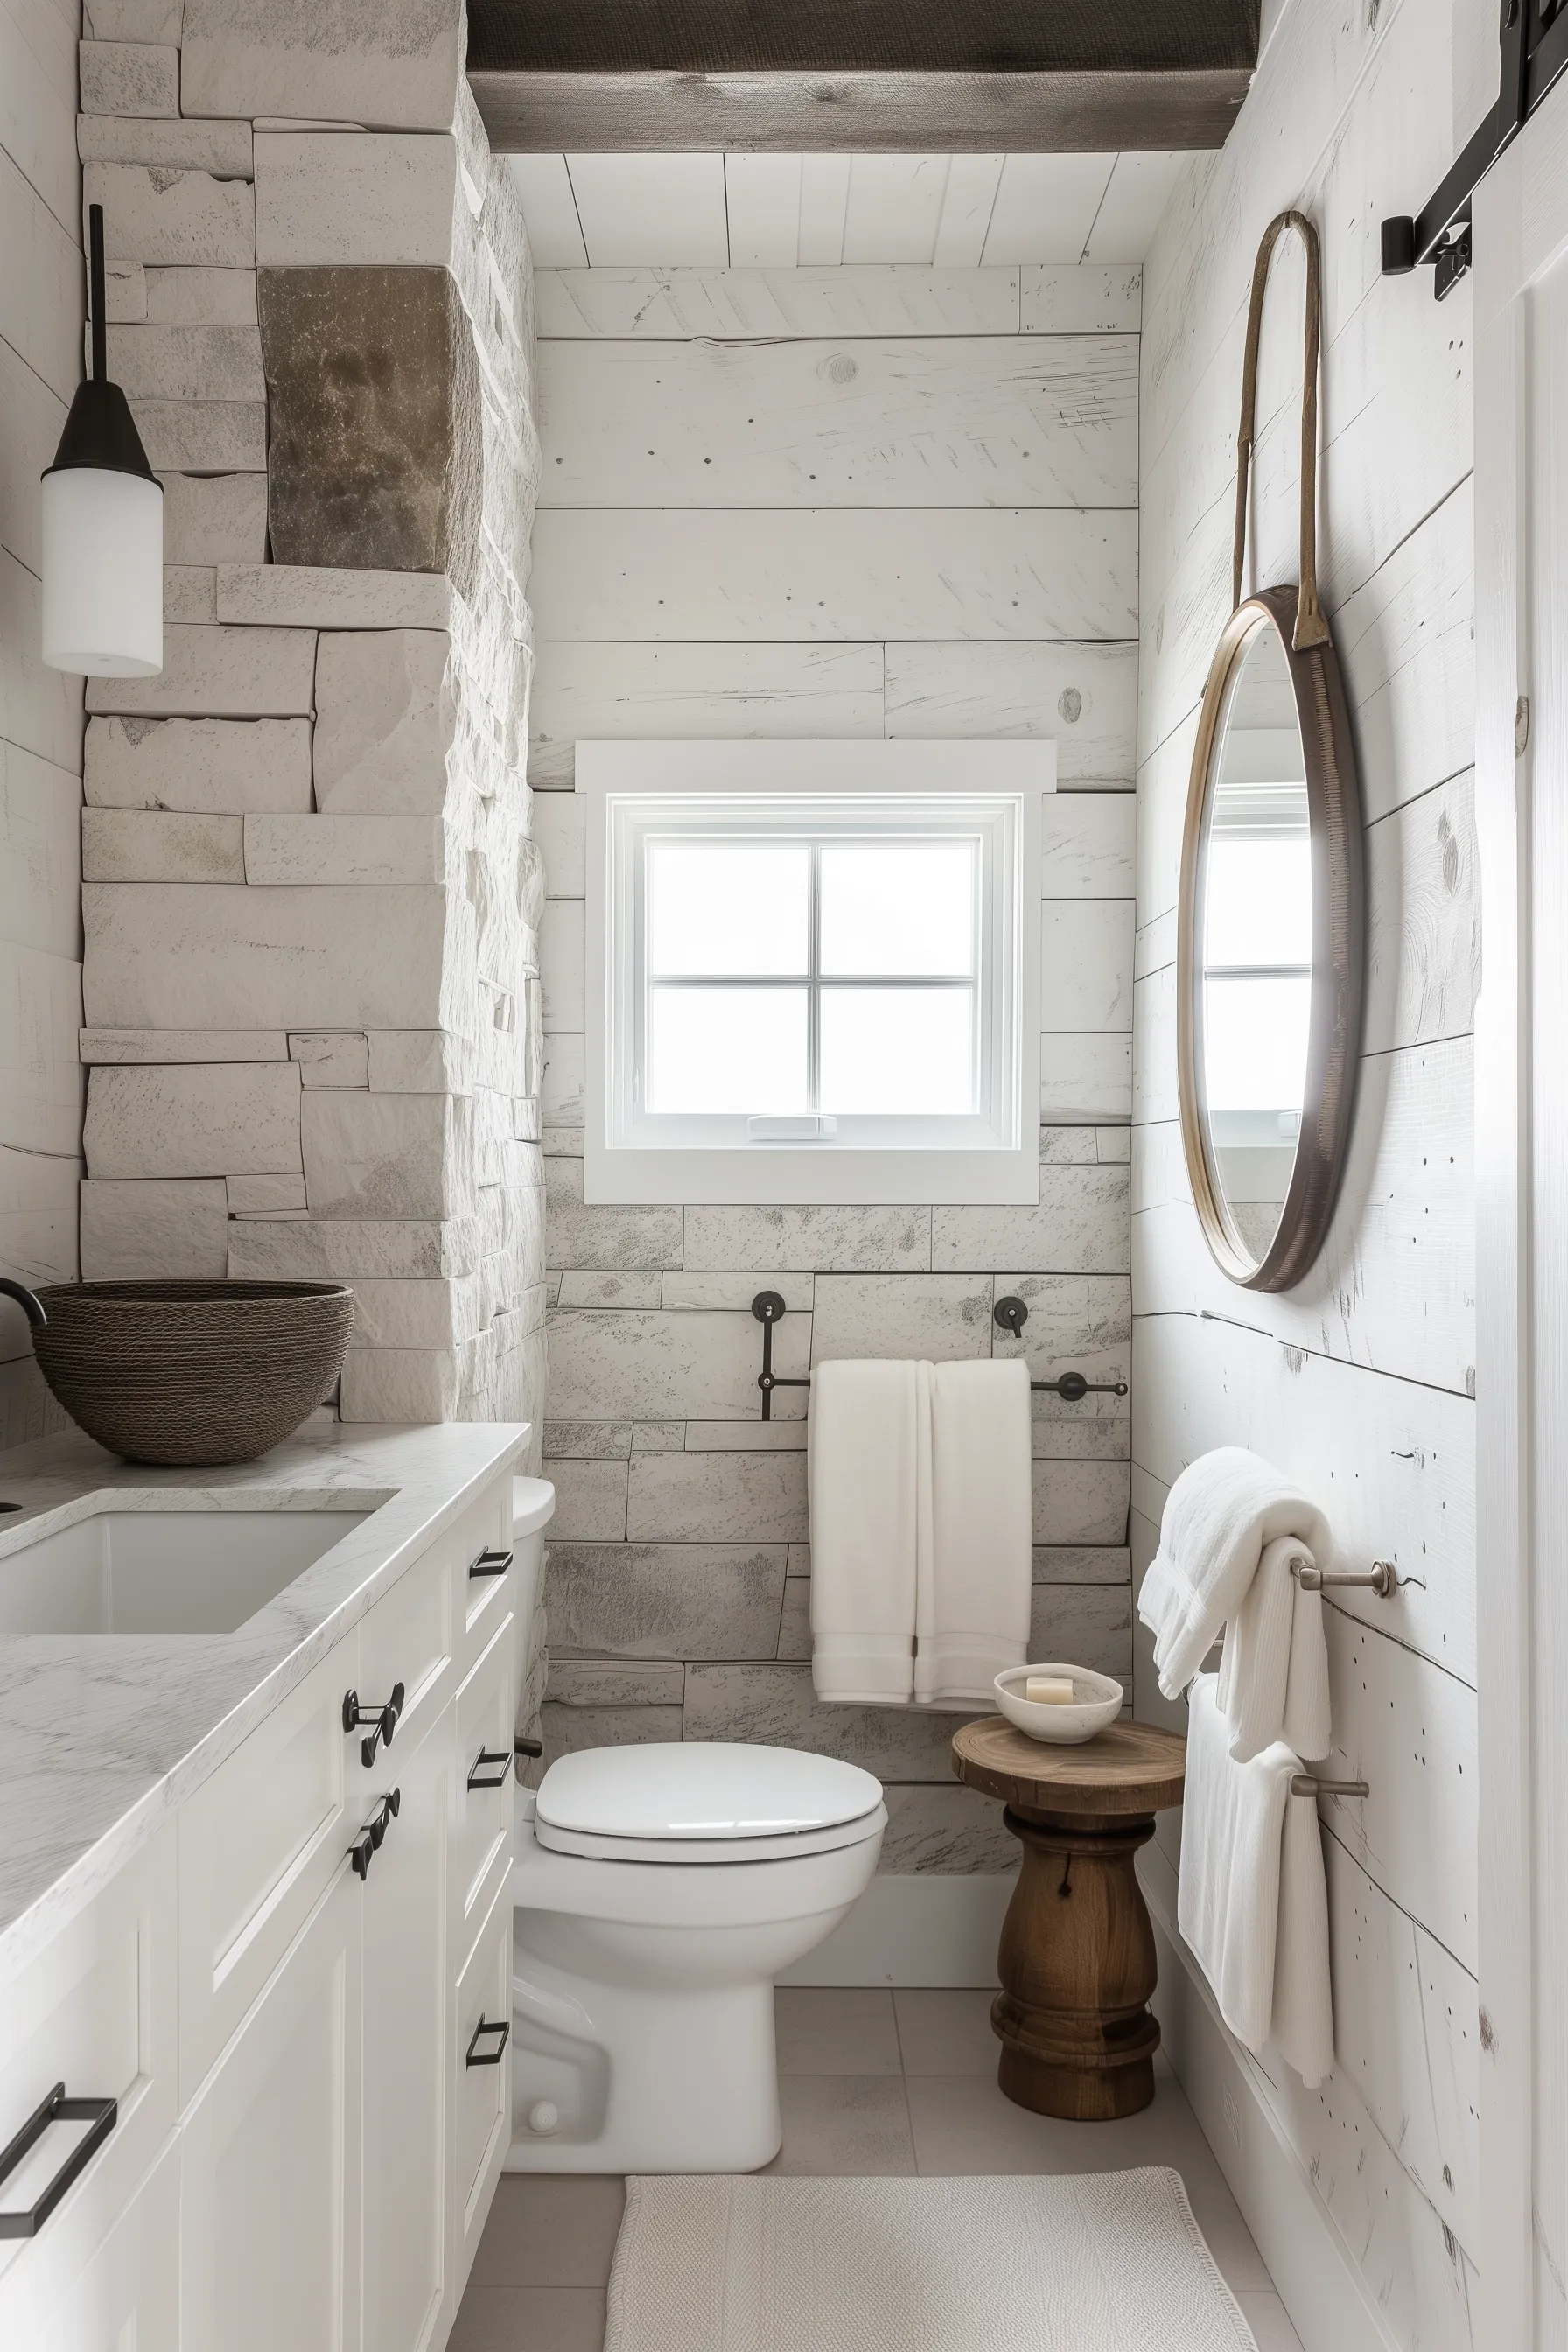 Vintage lights and vintage accents in a bathroom